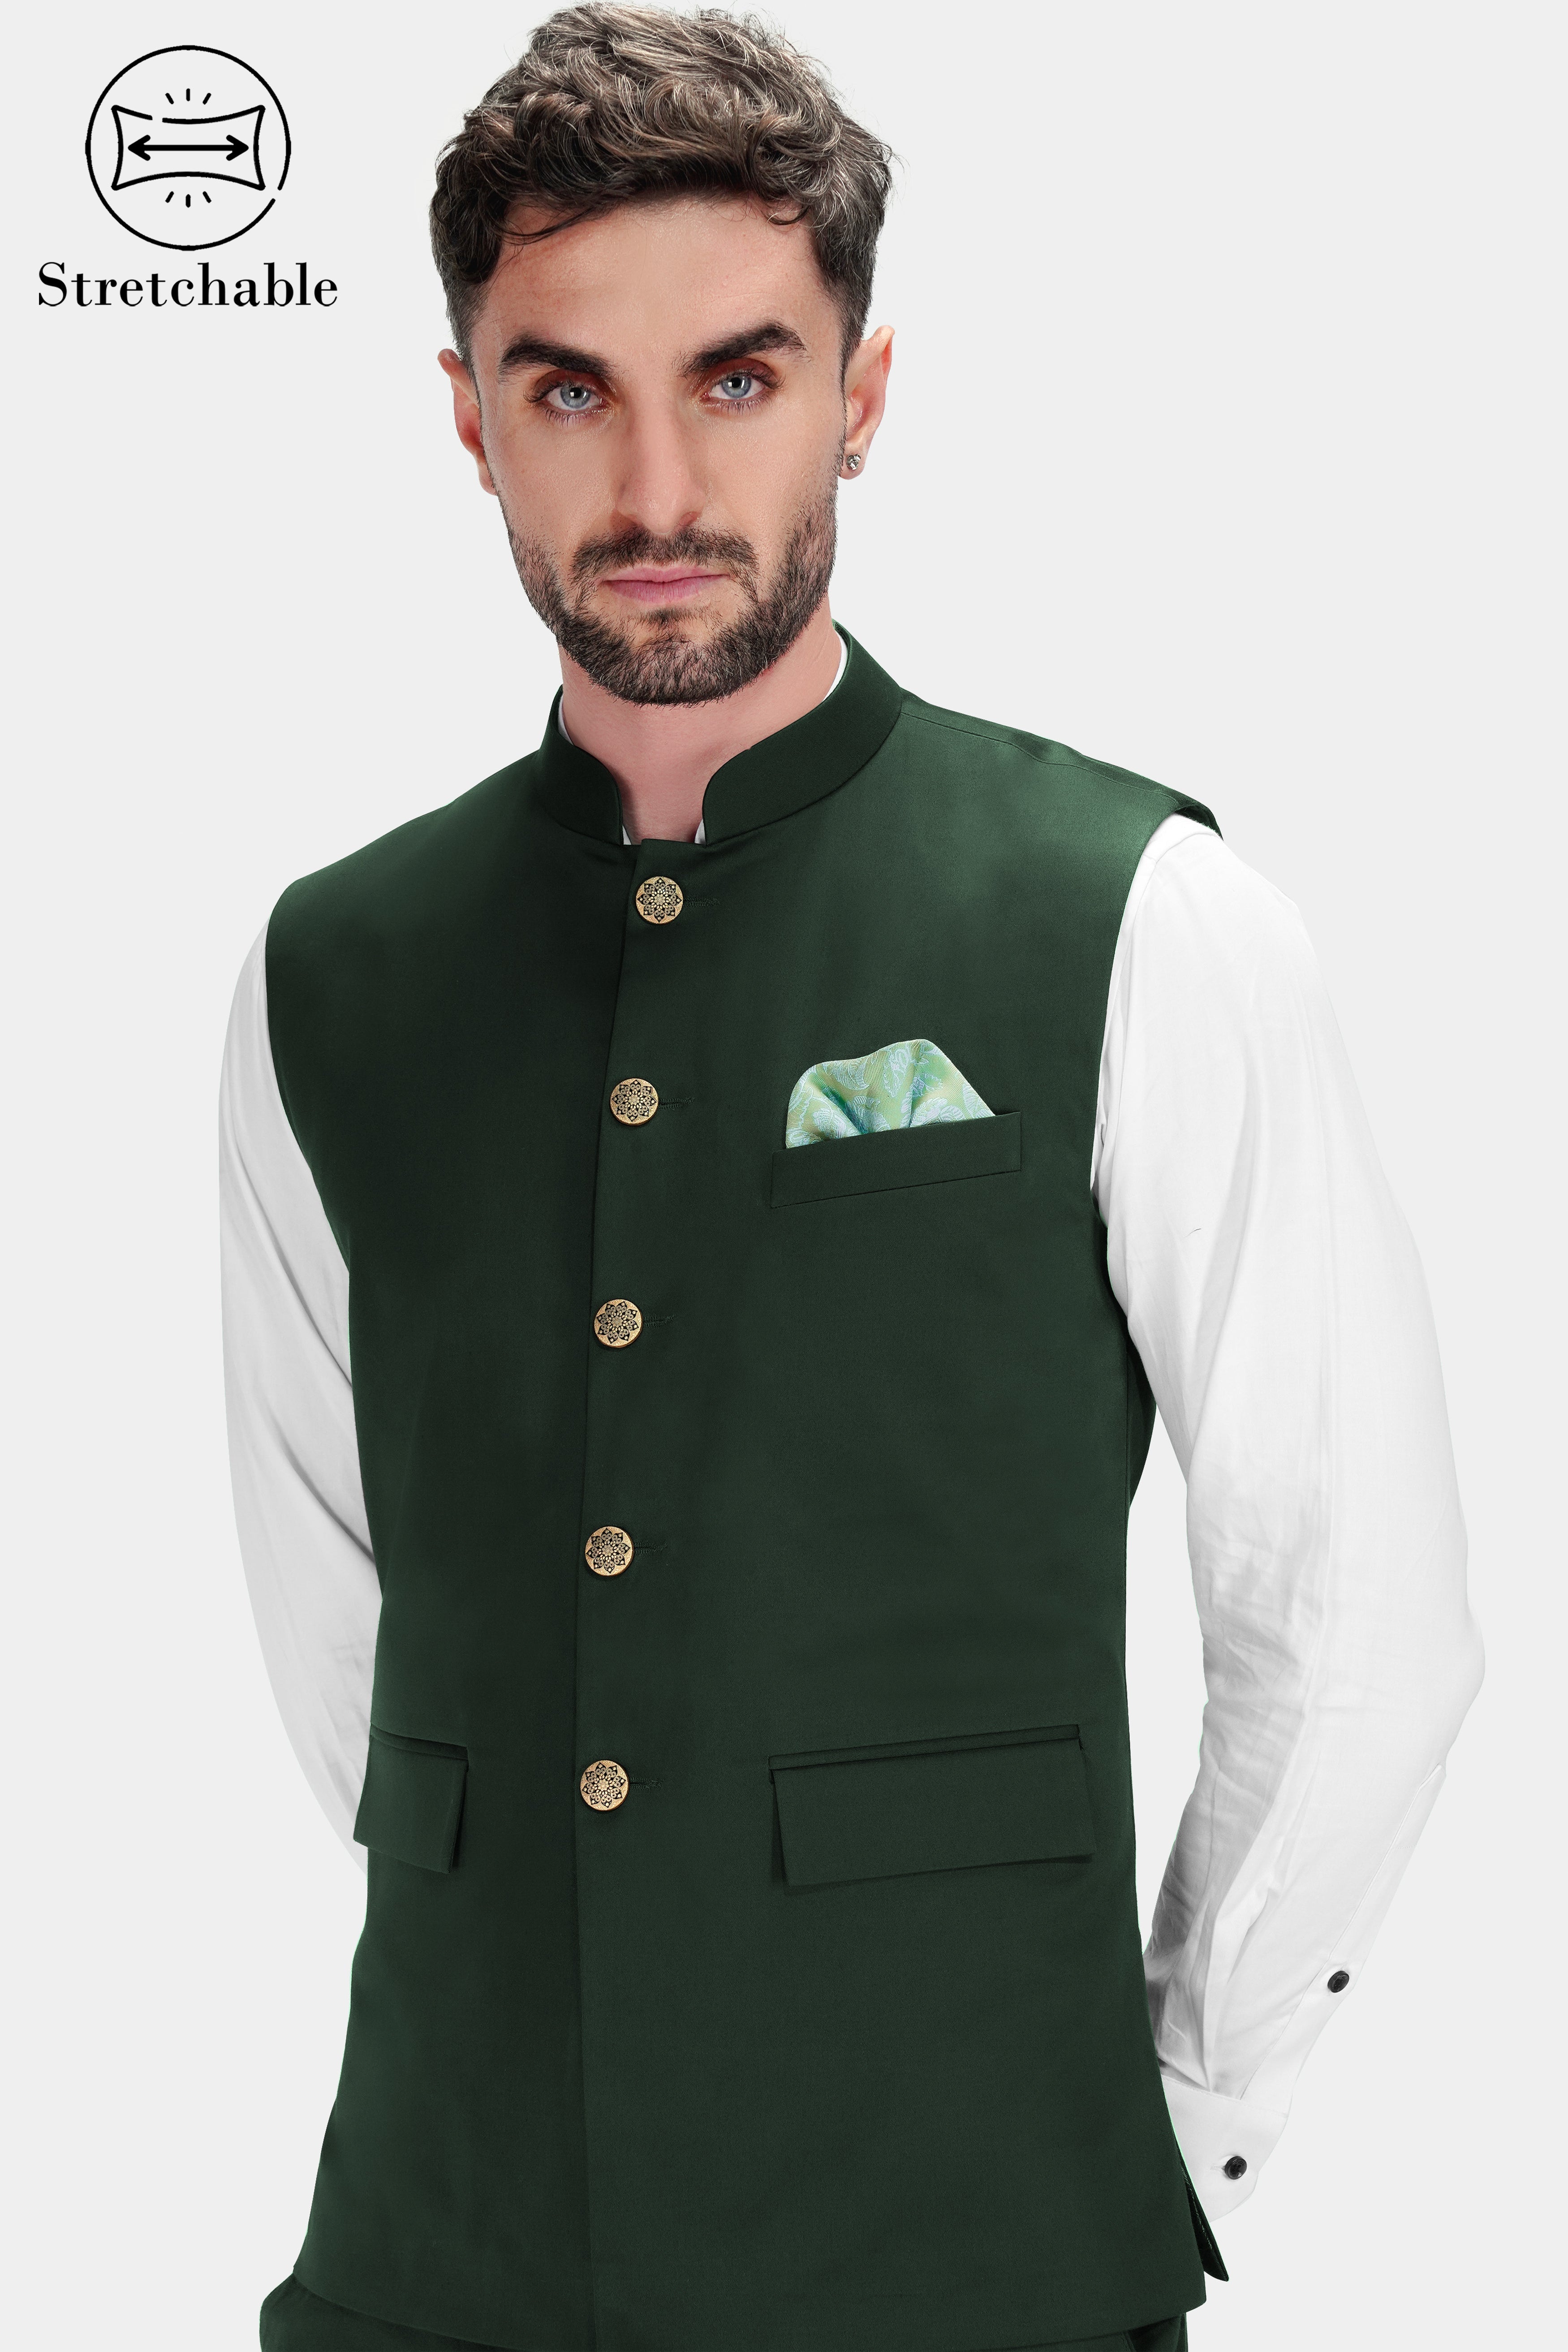 Heavy Metal Green Premium Cotton Stretchable Traveler Nehru Jacket WC2776-36, WC2776-38, WC2776-40, WC2776-42, WC2776-44, WC2776-46, WC2776-48, WC2776-50, WC2776-52, WC2776-54, WC2776-56, WC2776-58, WC2776-60